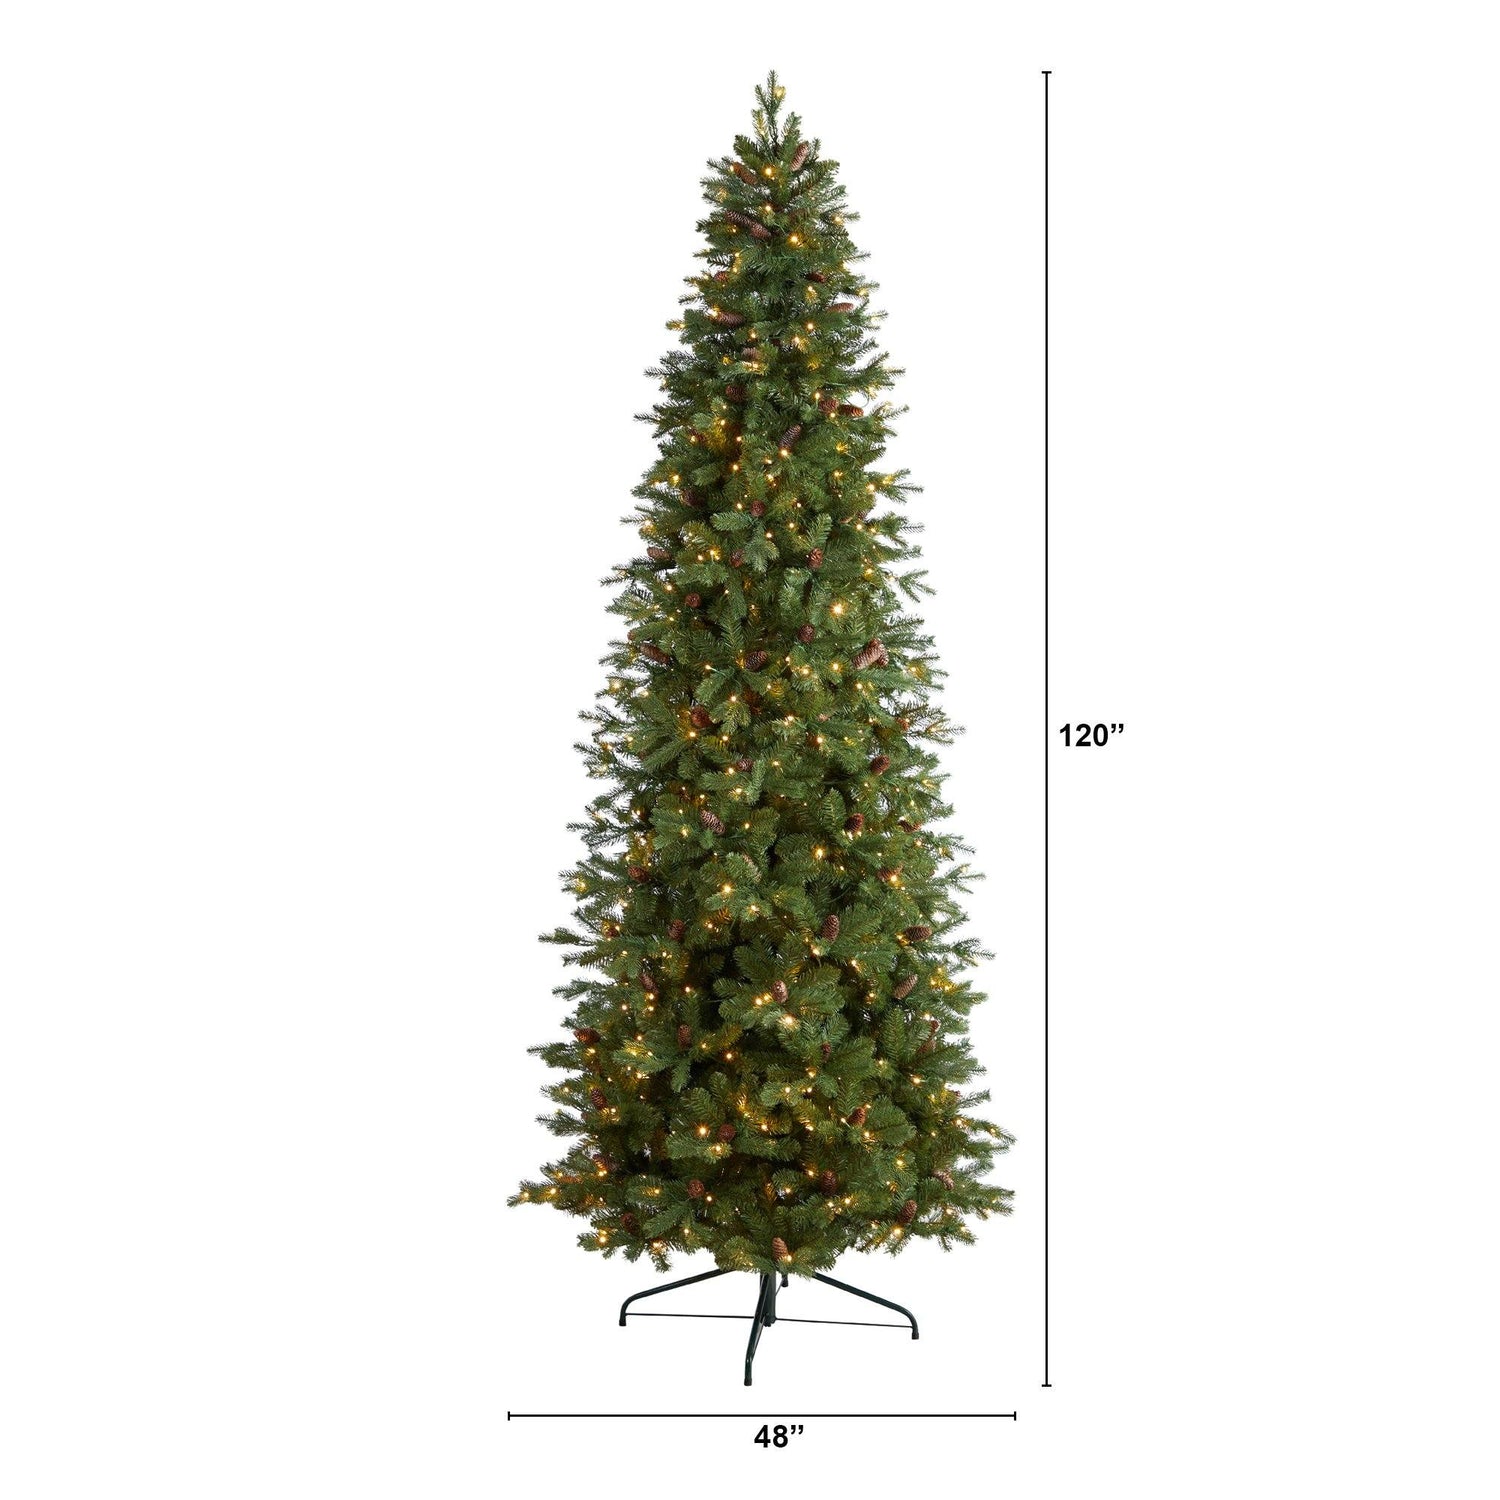 10’ Fraser Fir Artificial Christmas Tree with 780 Multicolor LED Lights and 2327 Bendable Branches